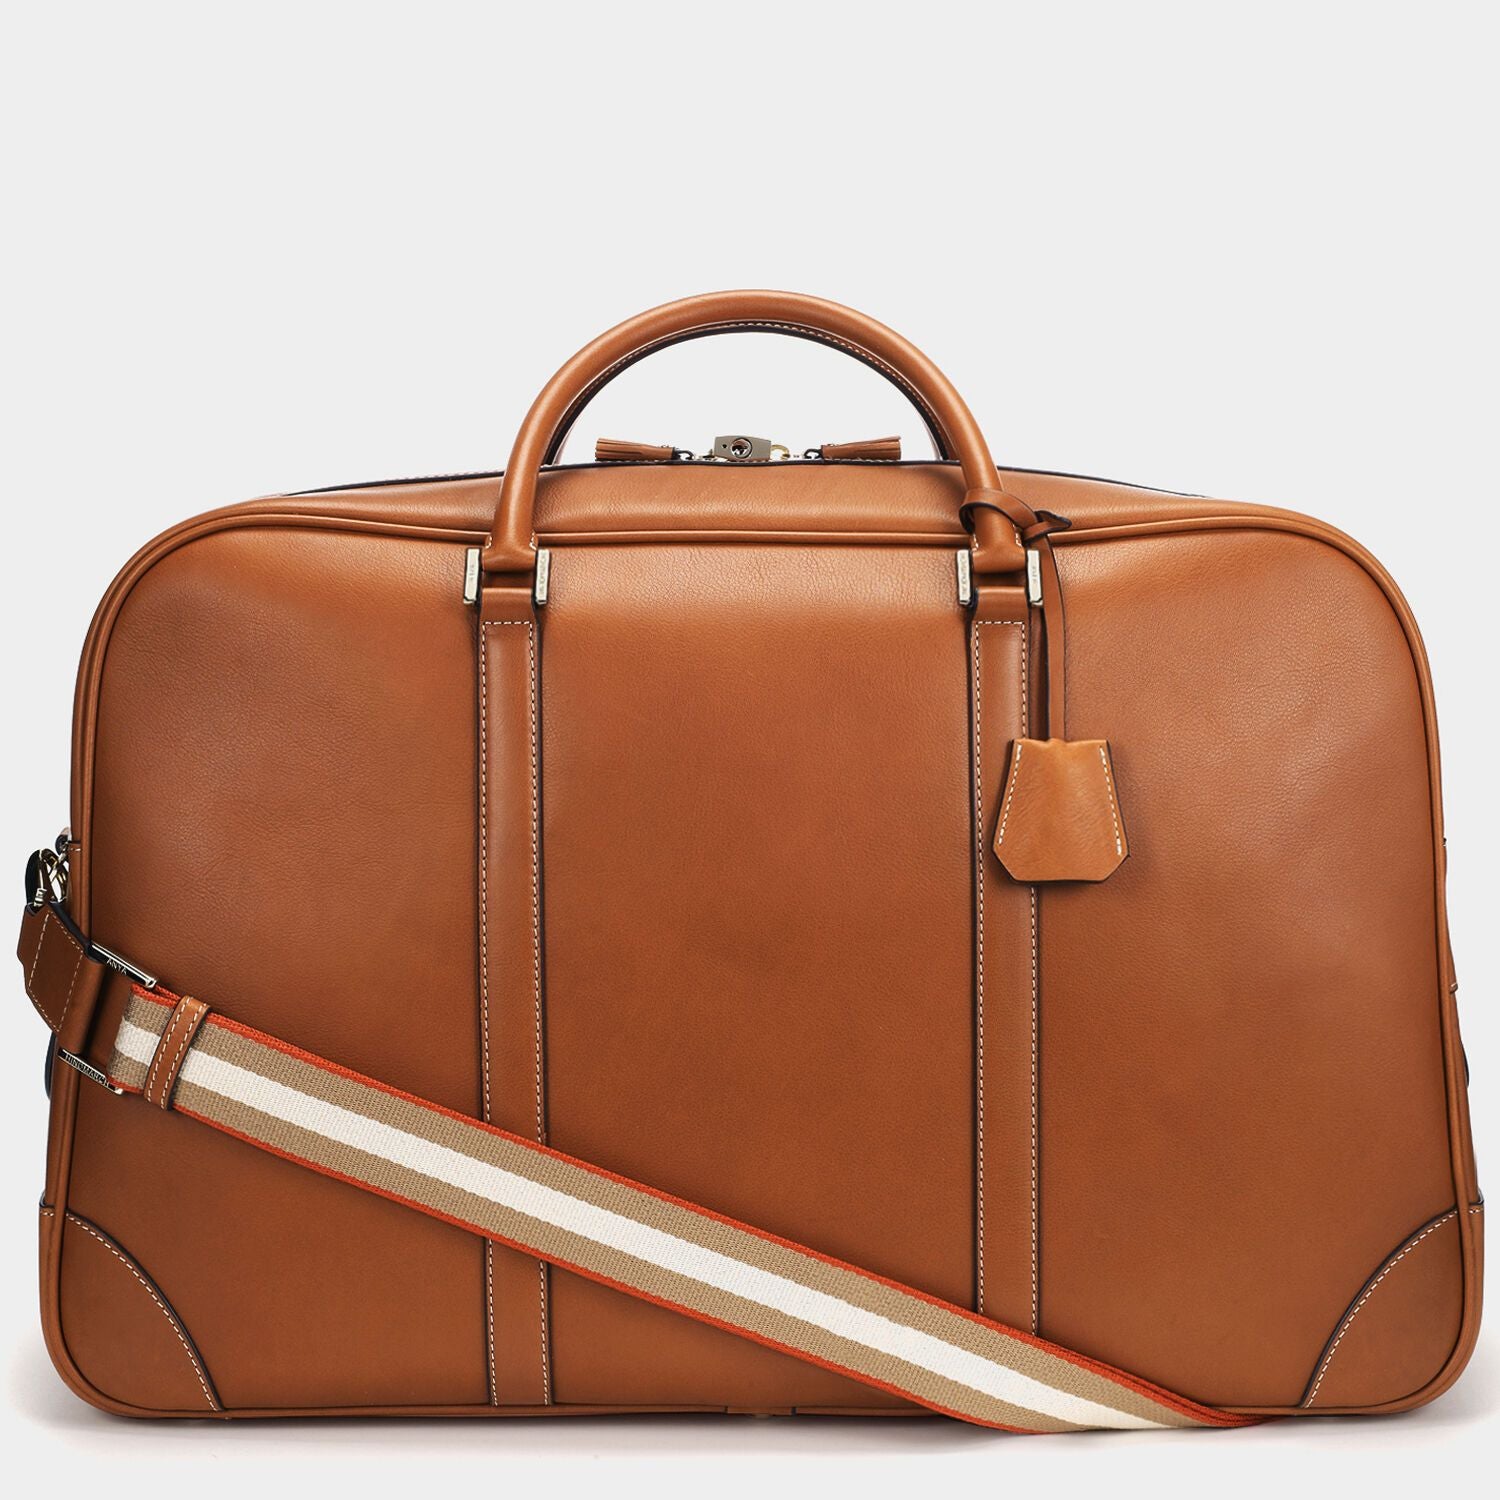 Bespoke Latimer Weekend Bag -

                  
                    Butter Leather in Tan -
                  

                  Anya Hindmarch US
